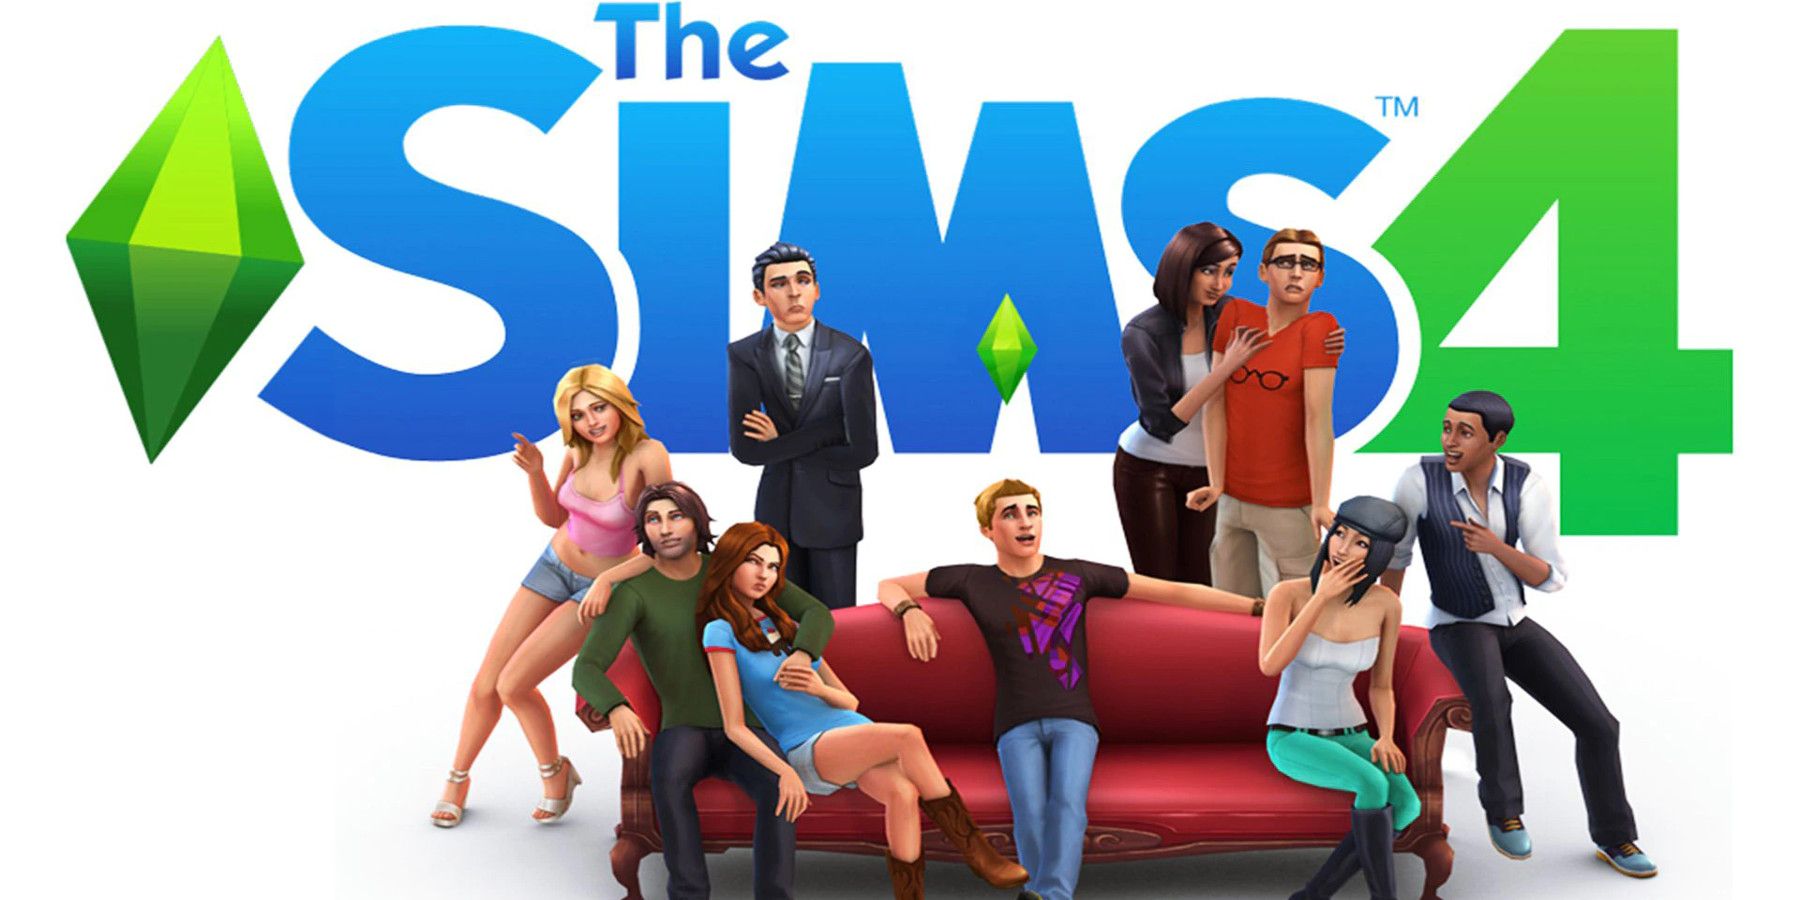 What Is The Sims 4 Legacy Edition, and Do You Need It?